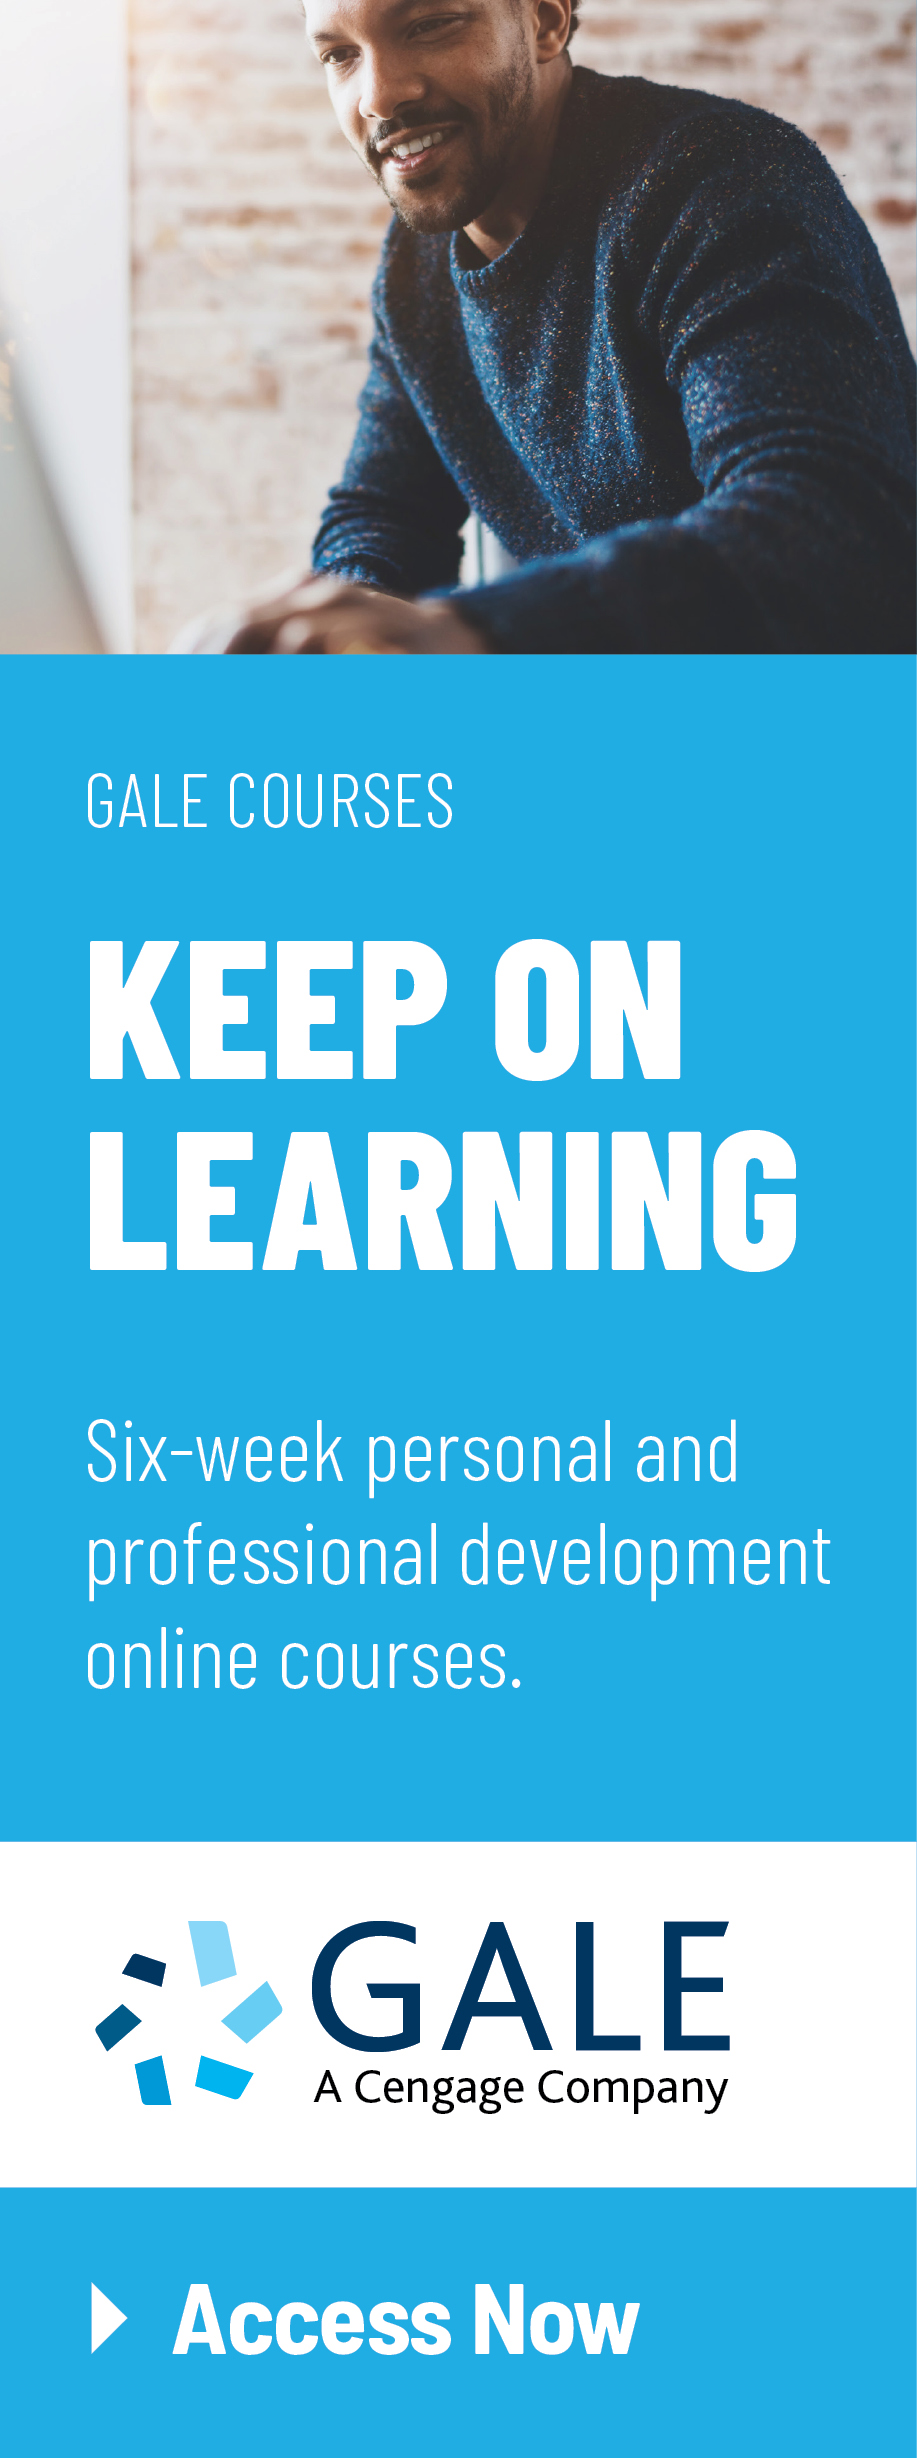 Gale Courses